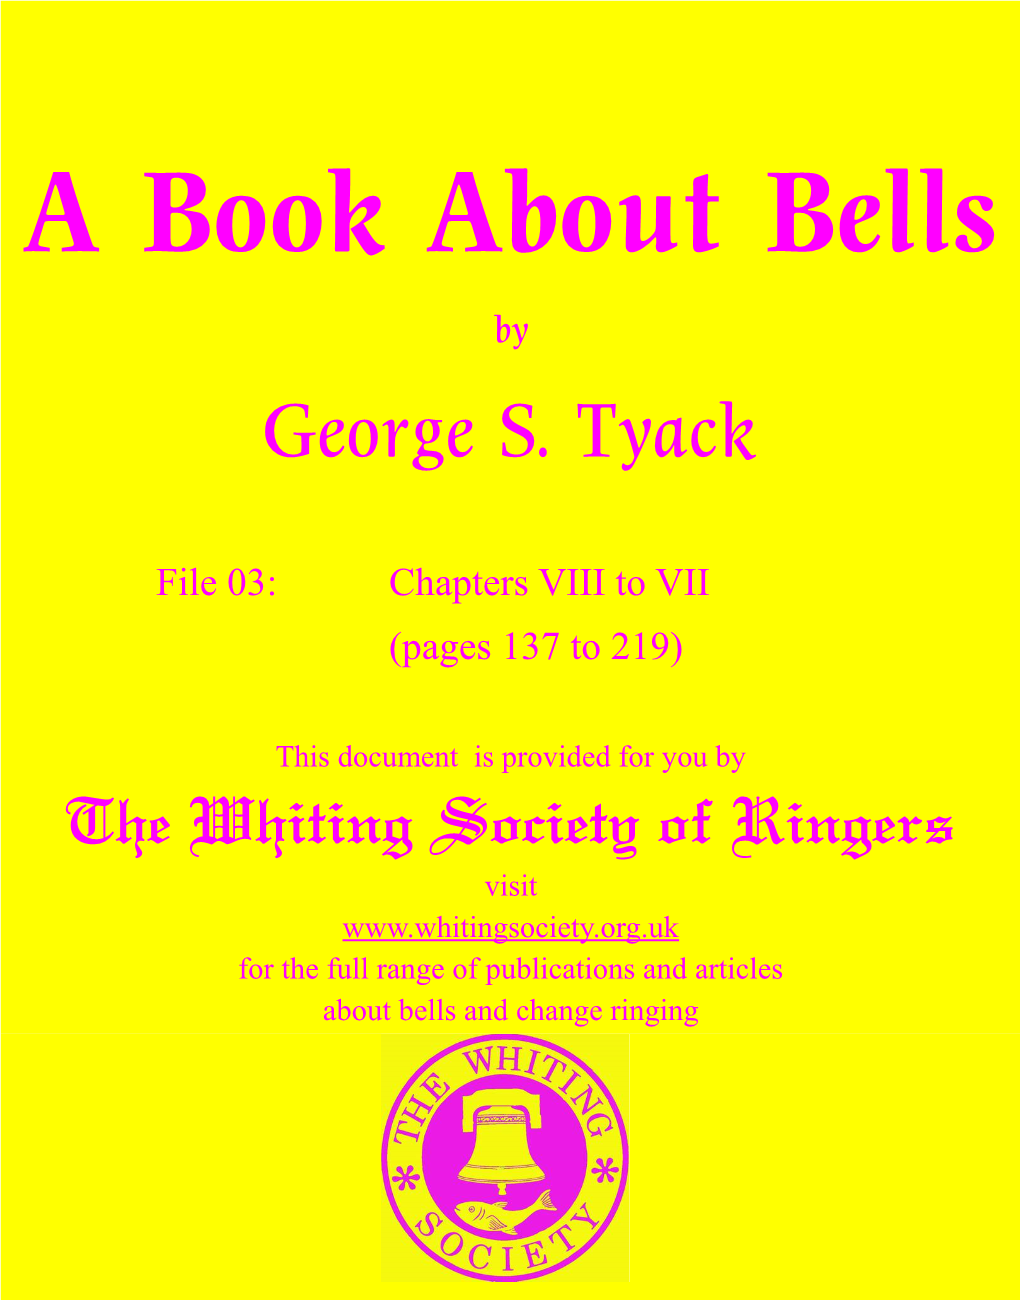 A Book About Bells by George S